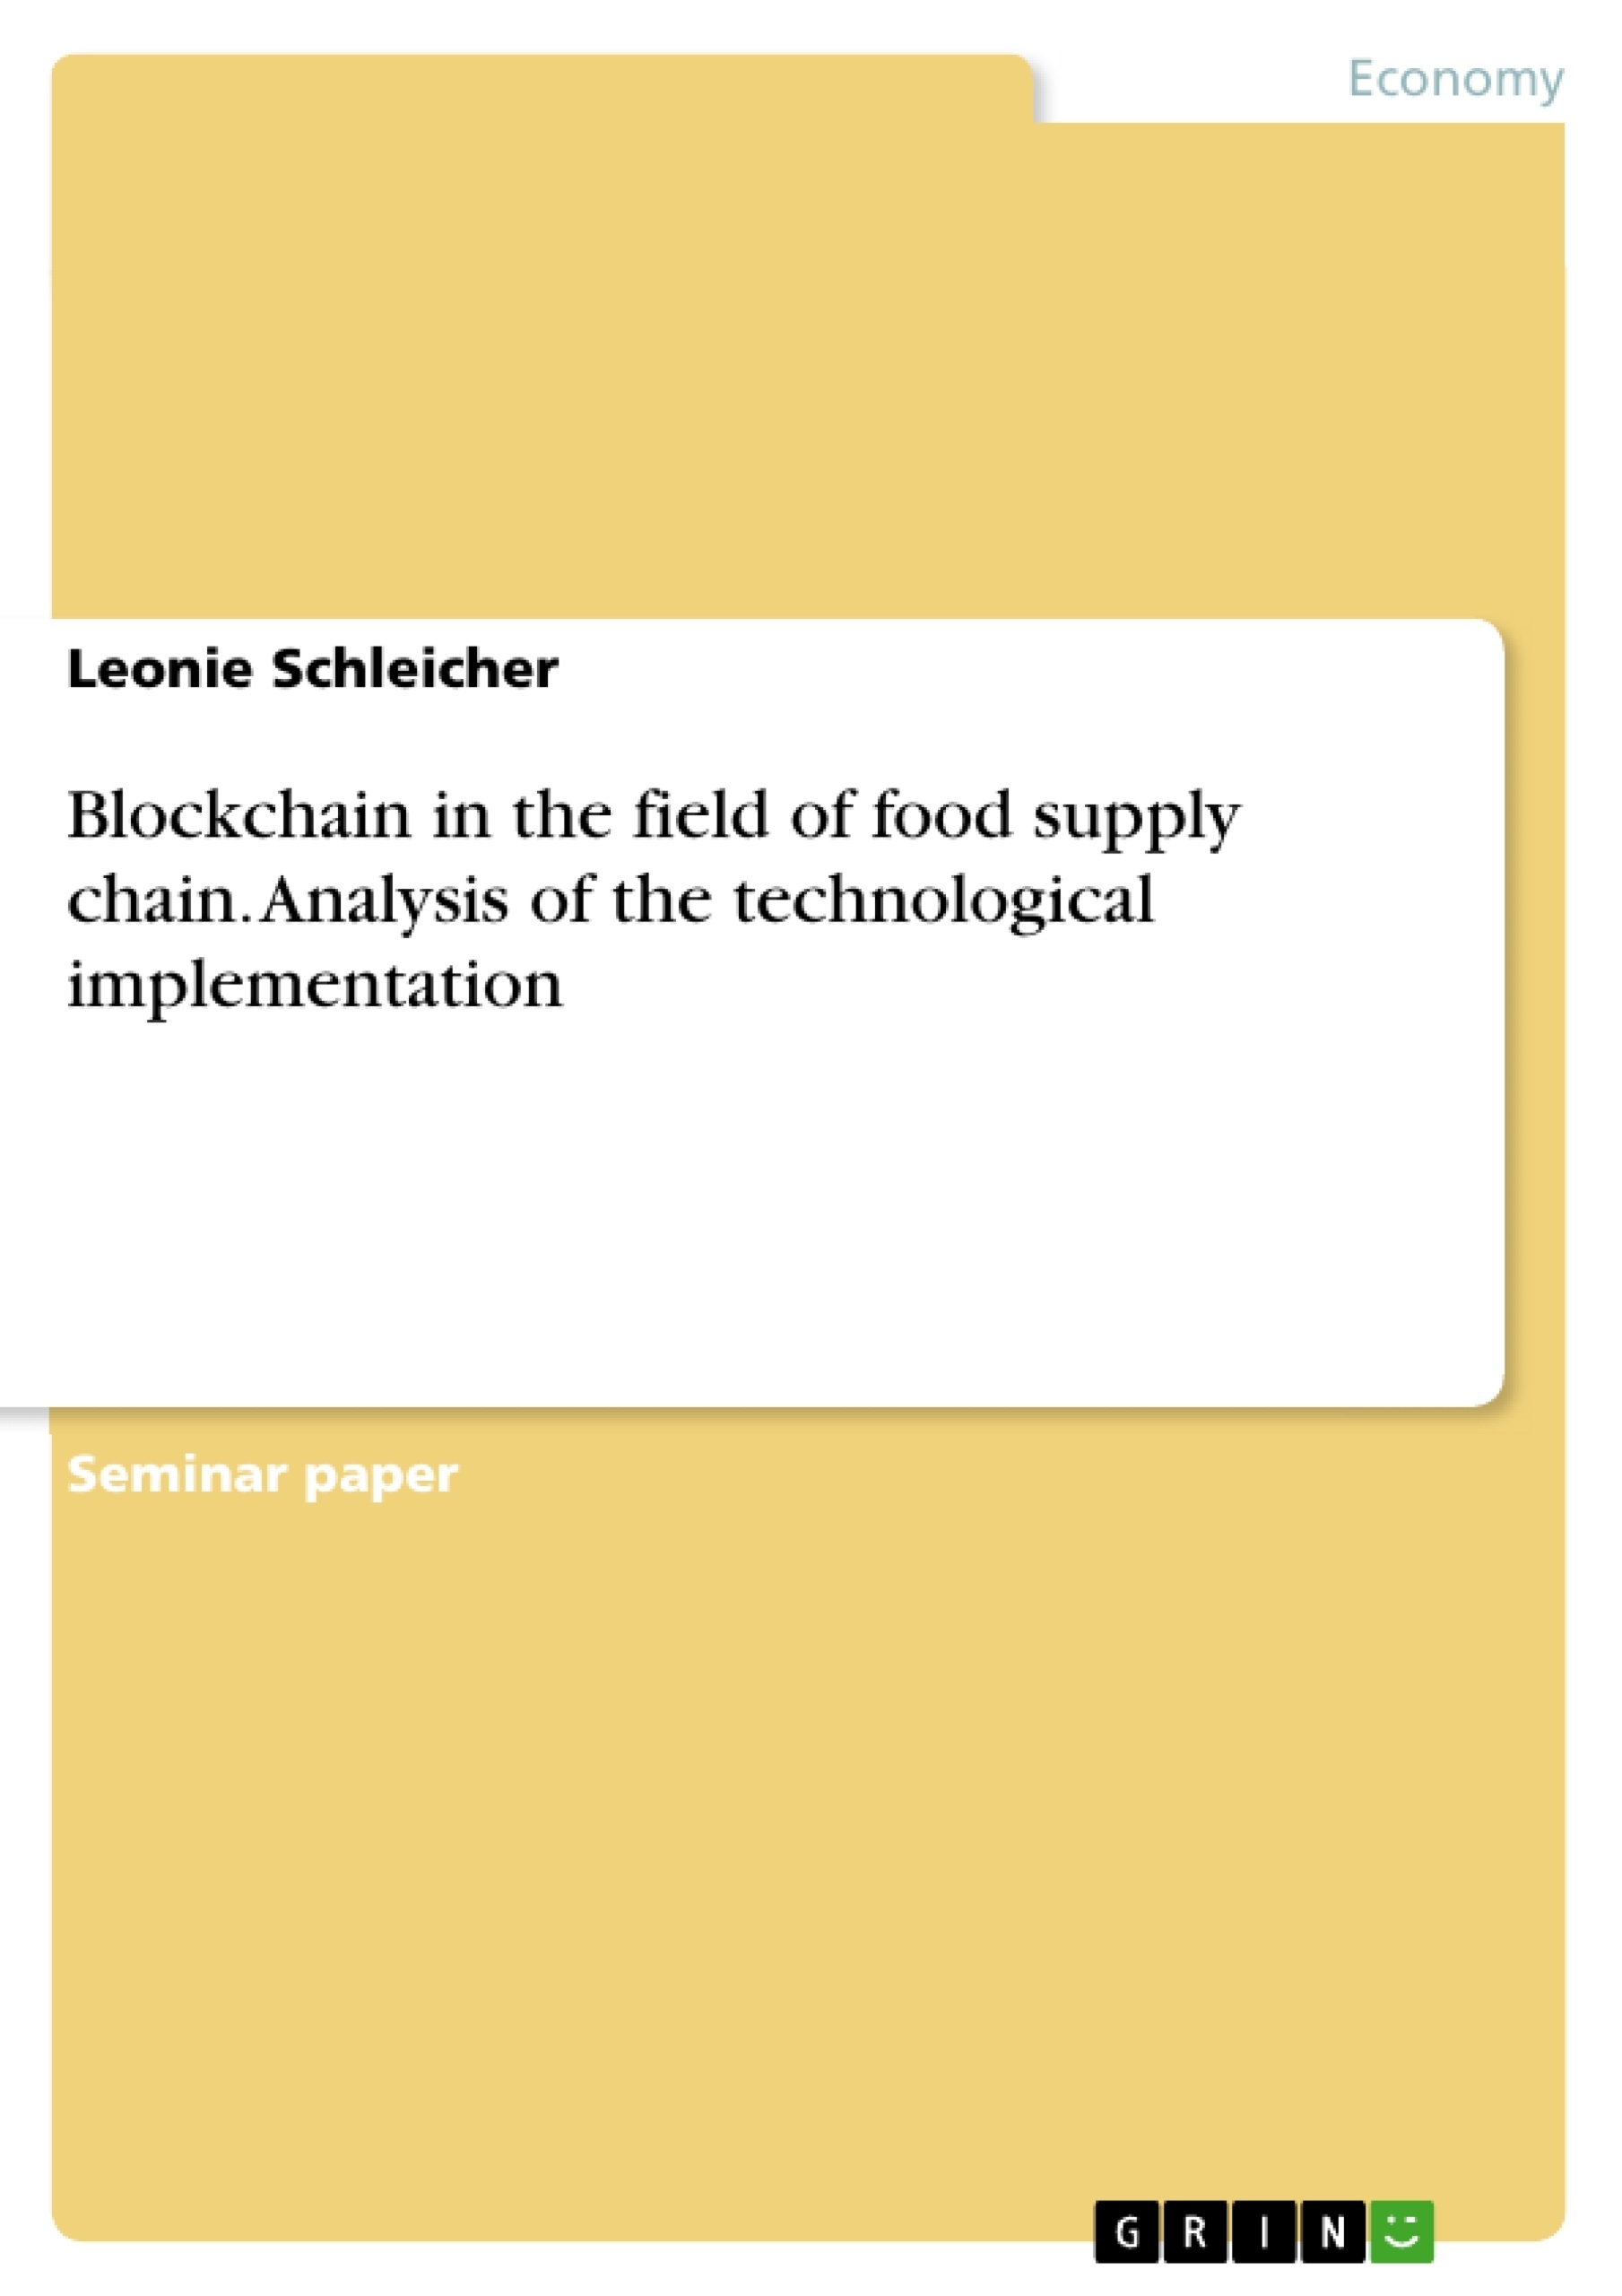 Title: Blockchain in the field of food supply chain. Analysis of the technological implementation